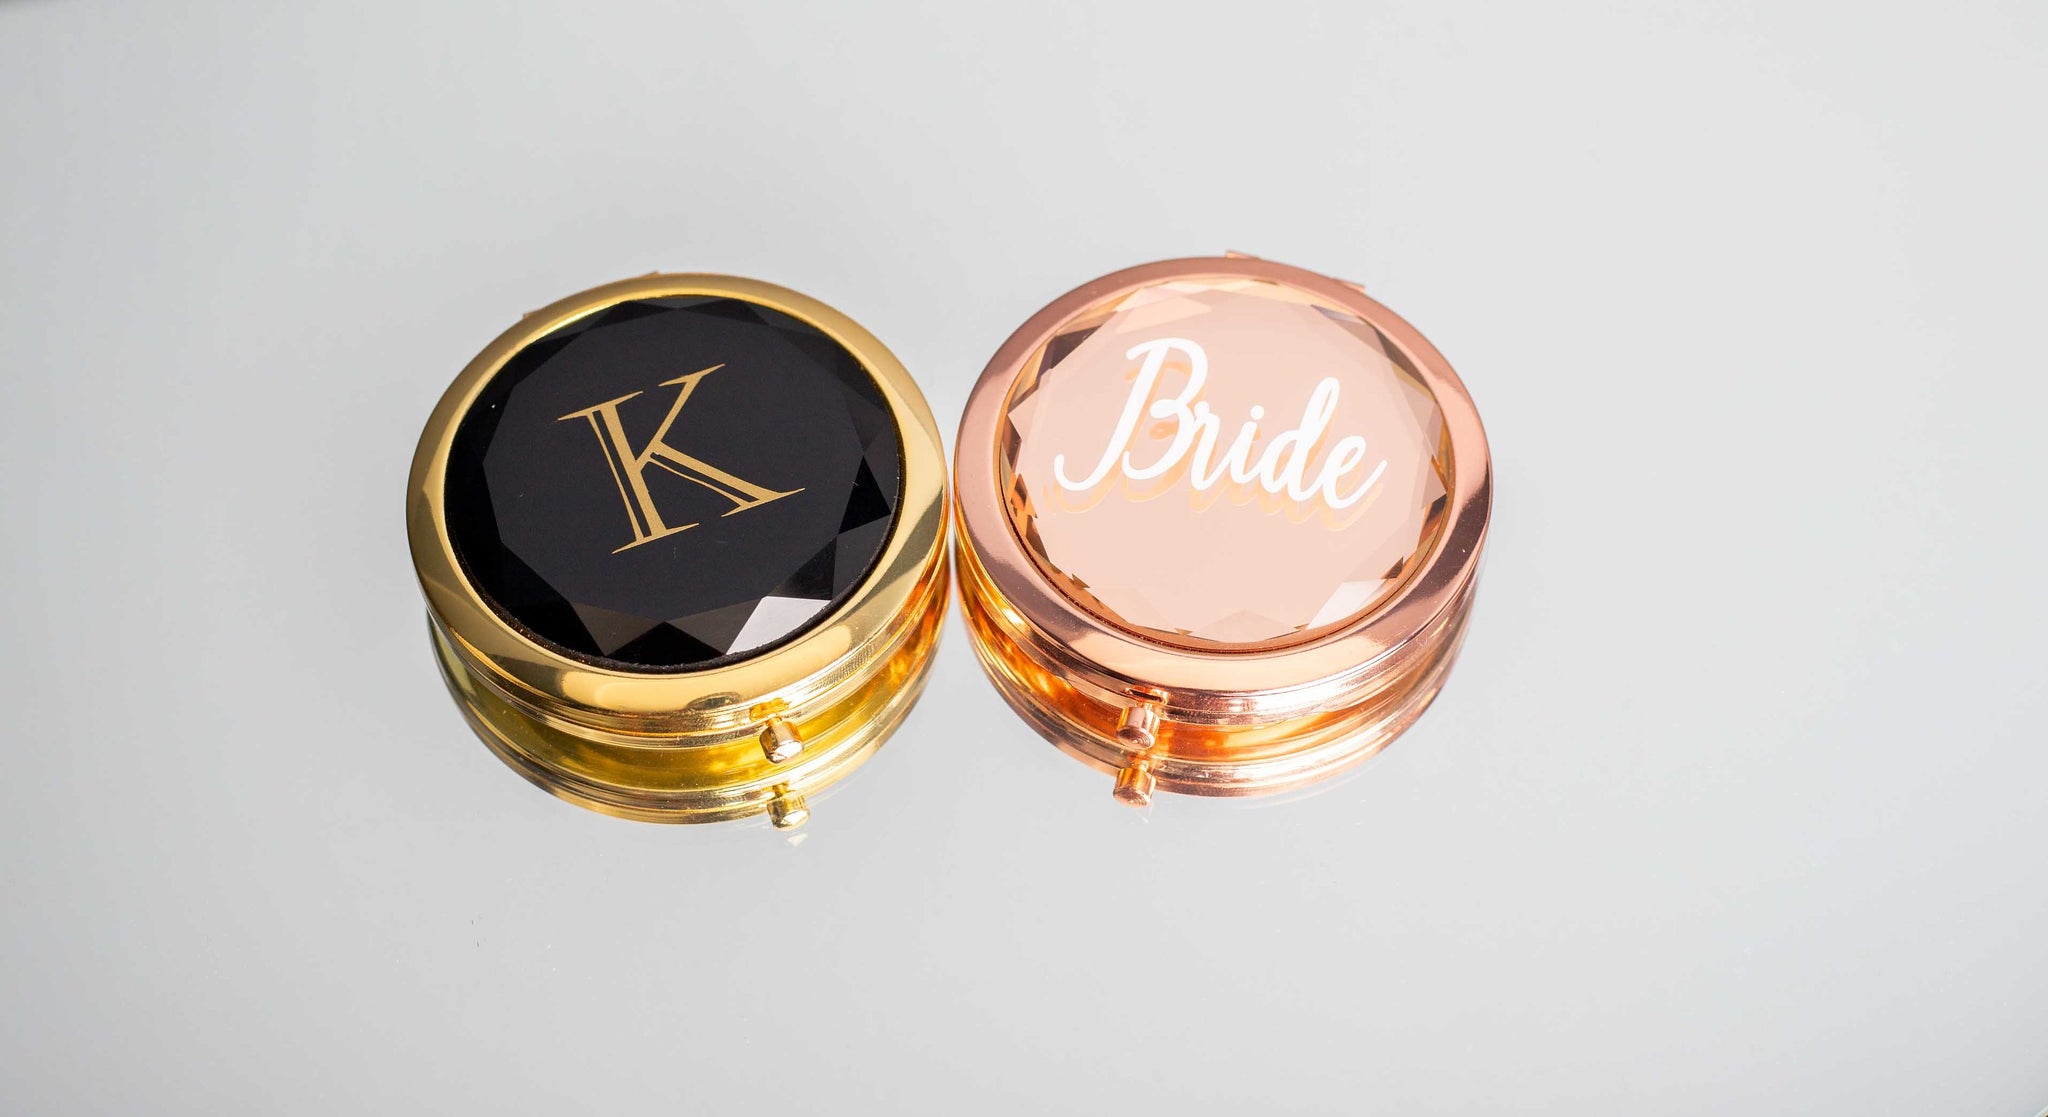 Personalized Jewel Top Compact Mirror For Your Bridesmaid Proposal Box